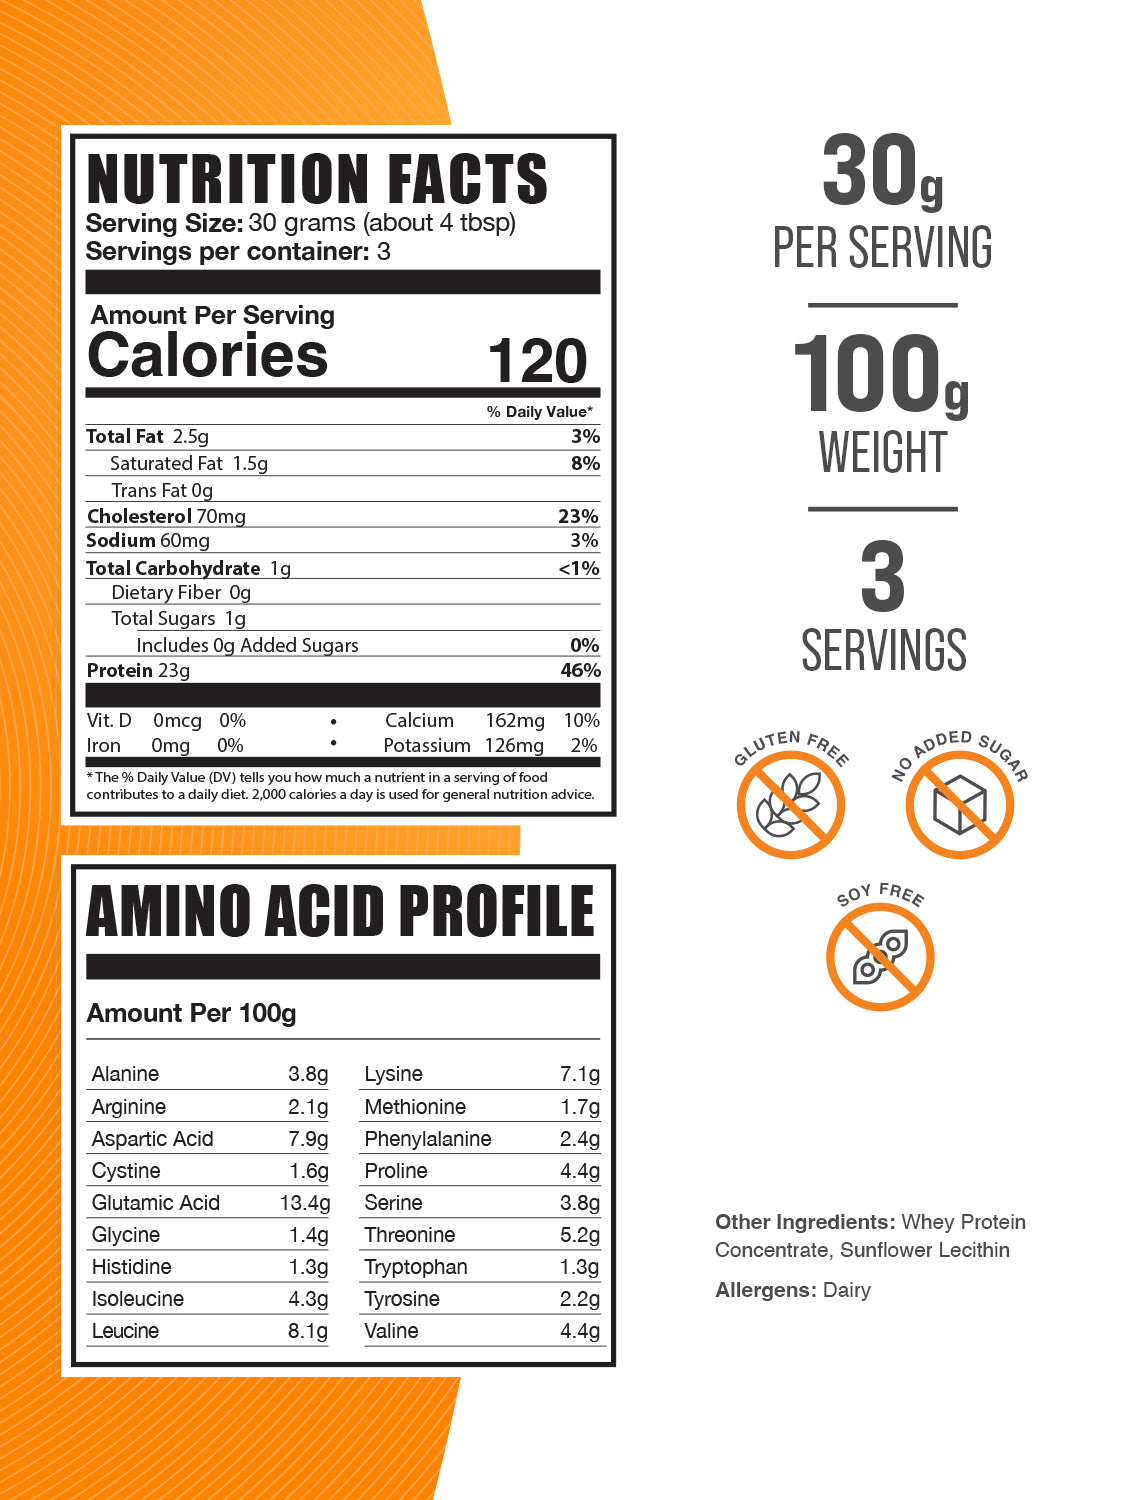 Whey protein concentrate 100g label